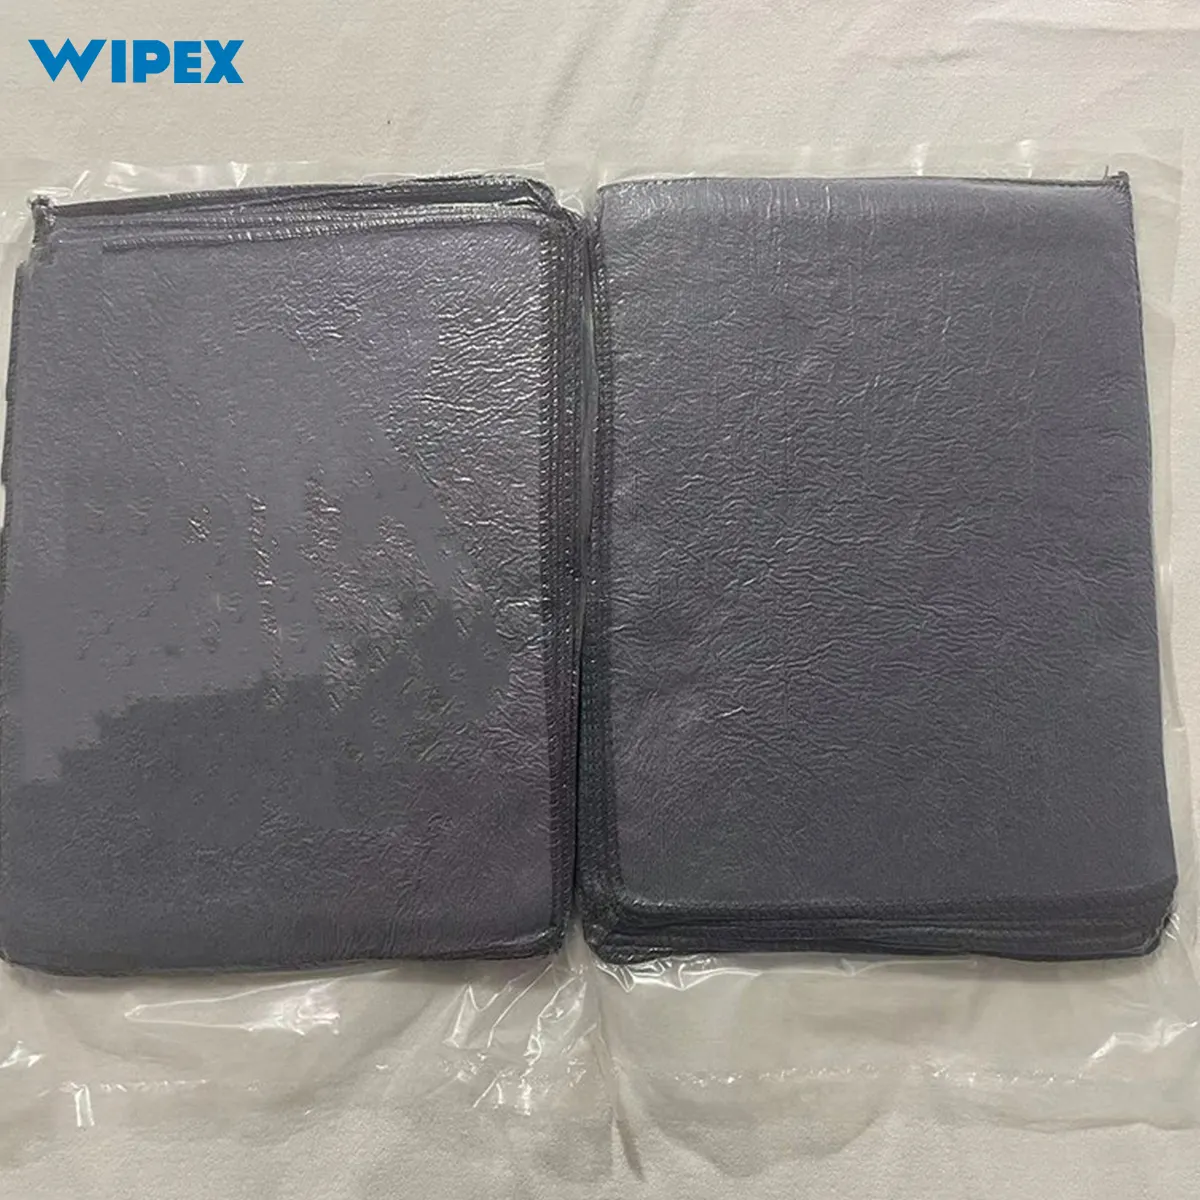 Vacuum compression packaging microfiber cleaning towel All purpose microfibre cloths car washing Chiffons Microfibre cloth